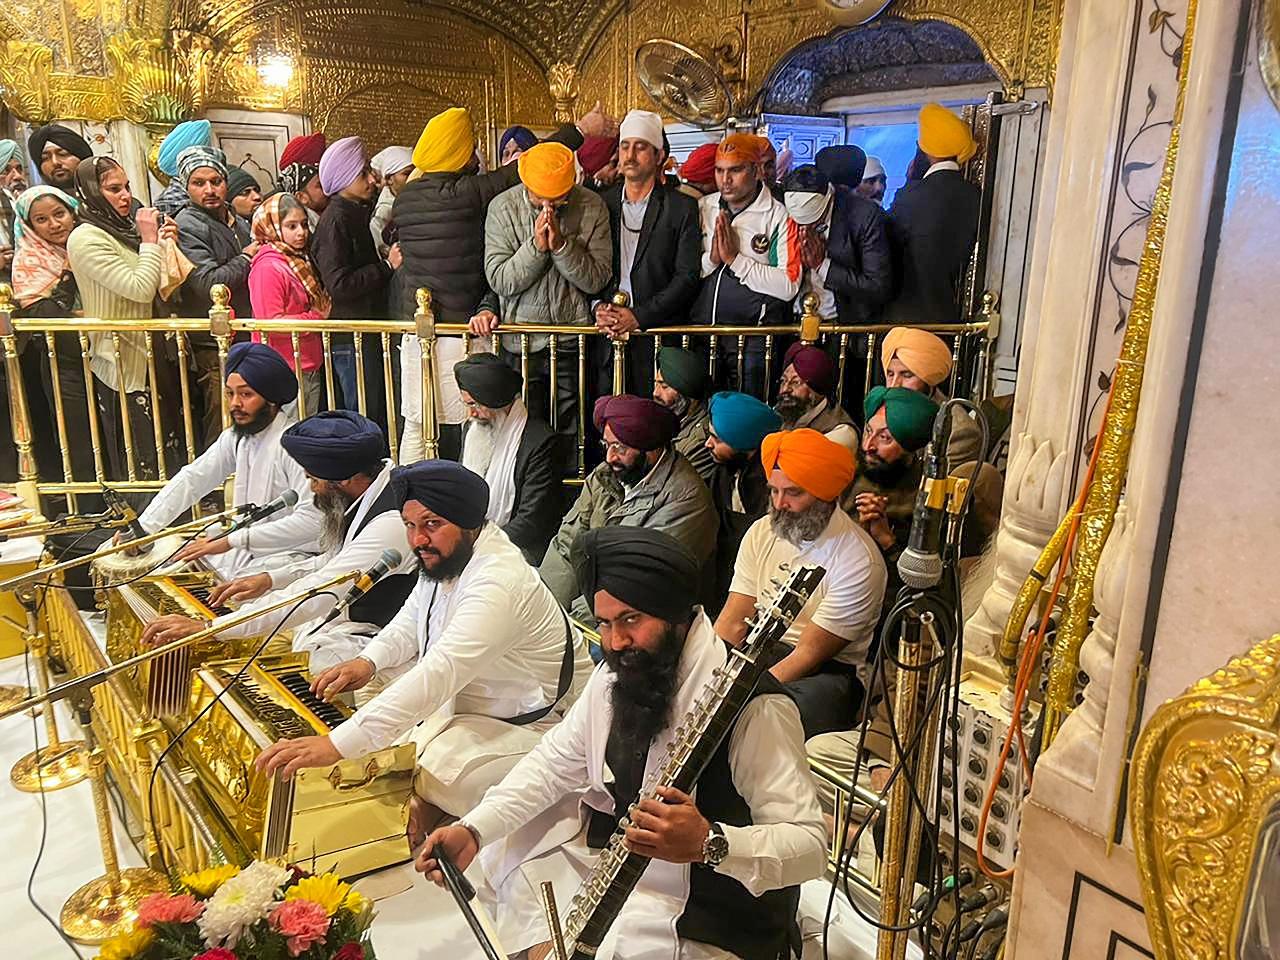 Gandhi had on Tuesday offered prayers at the Golden Temple in Amritsar after concluding the Haryana leg of the march in Ambala district (Pic/PTI)